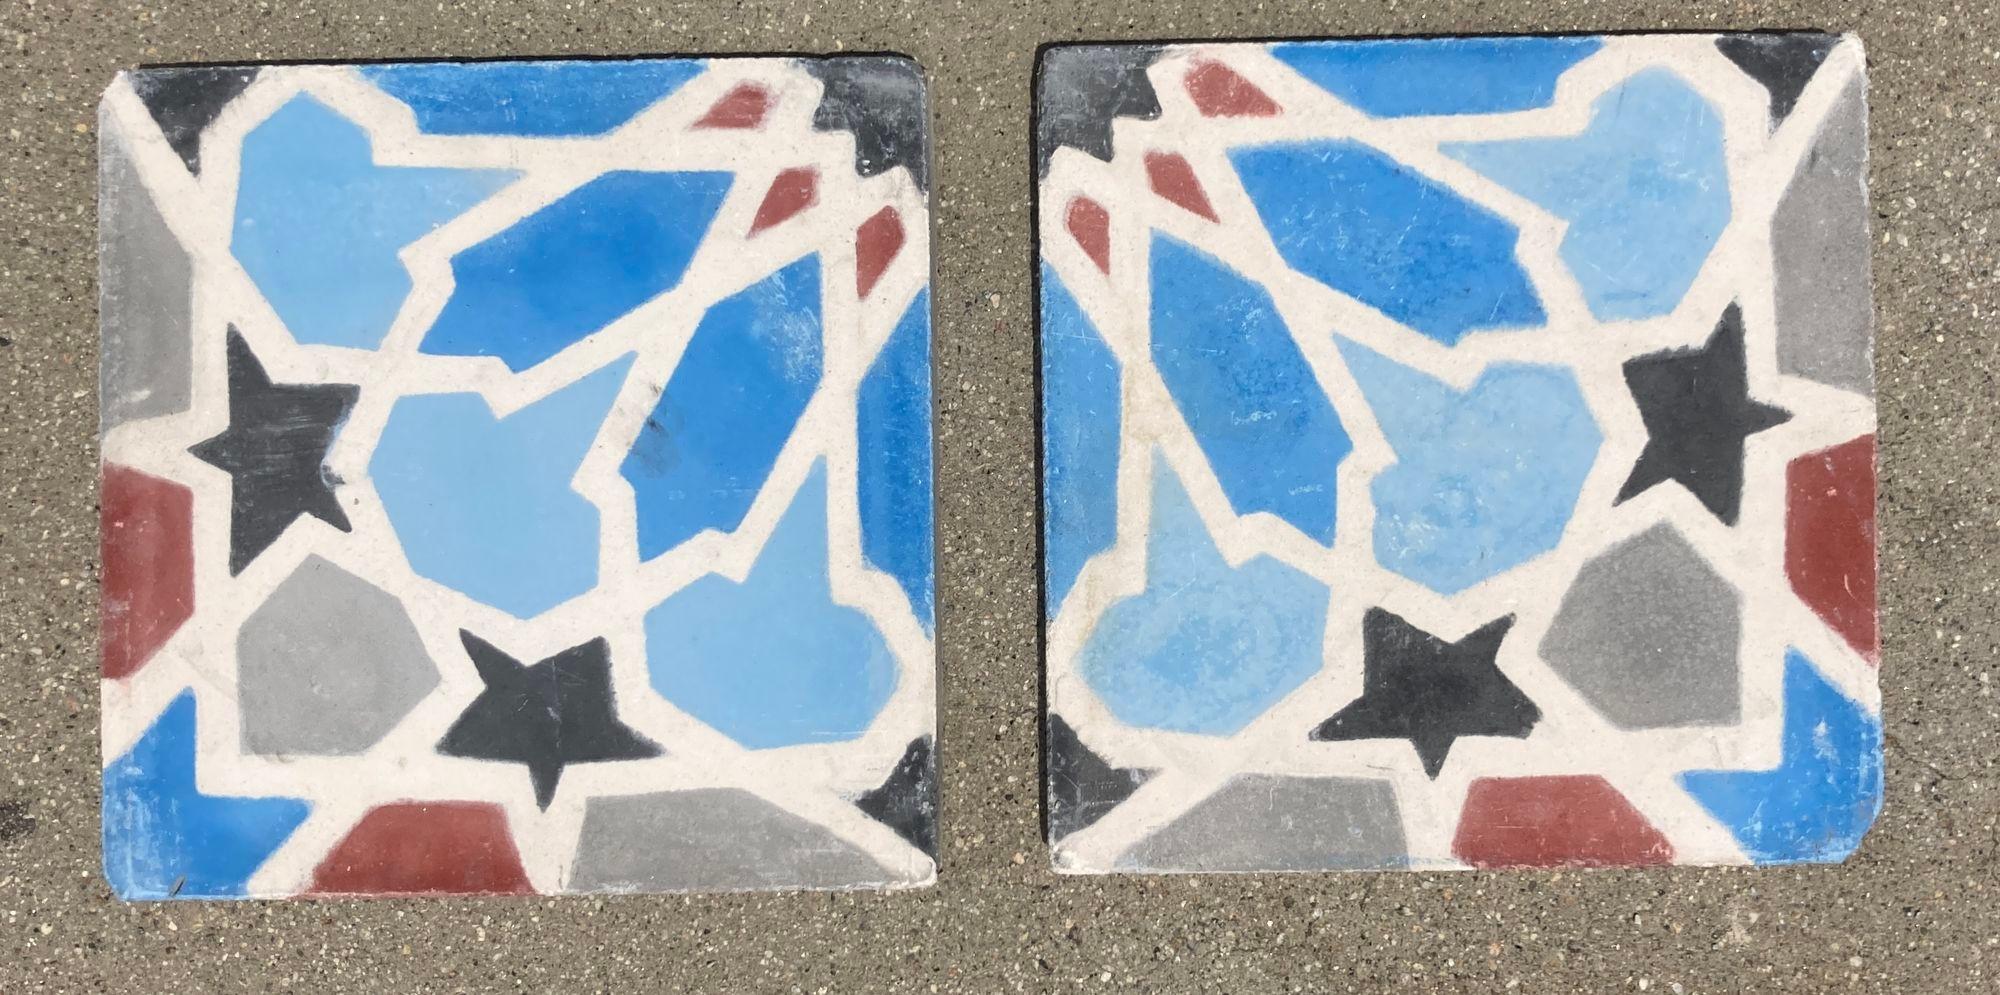 Moroccan Encaustic Cement Tile Border with Moorish Fez Design.
Moroccan handcrafted reclaimed cement tiles with traditional Fez color.
These are authentic Moroccan reclaimed encaustic tiles hand made by artisans in Fez Morocco.
This is the